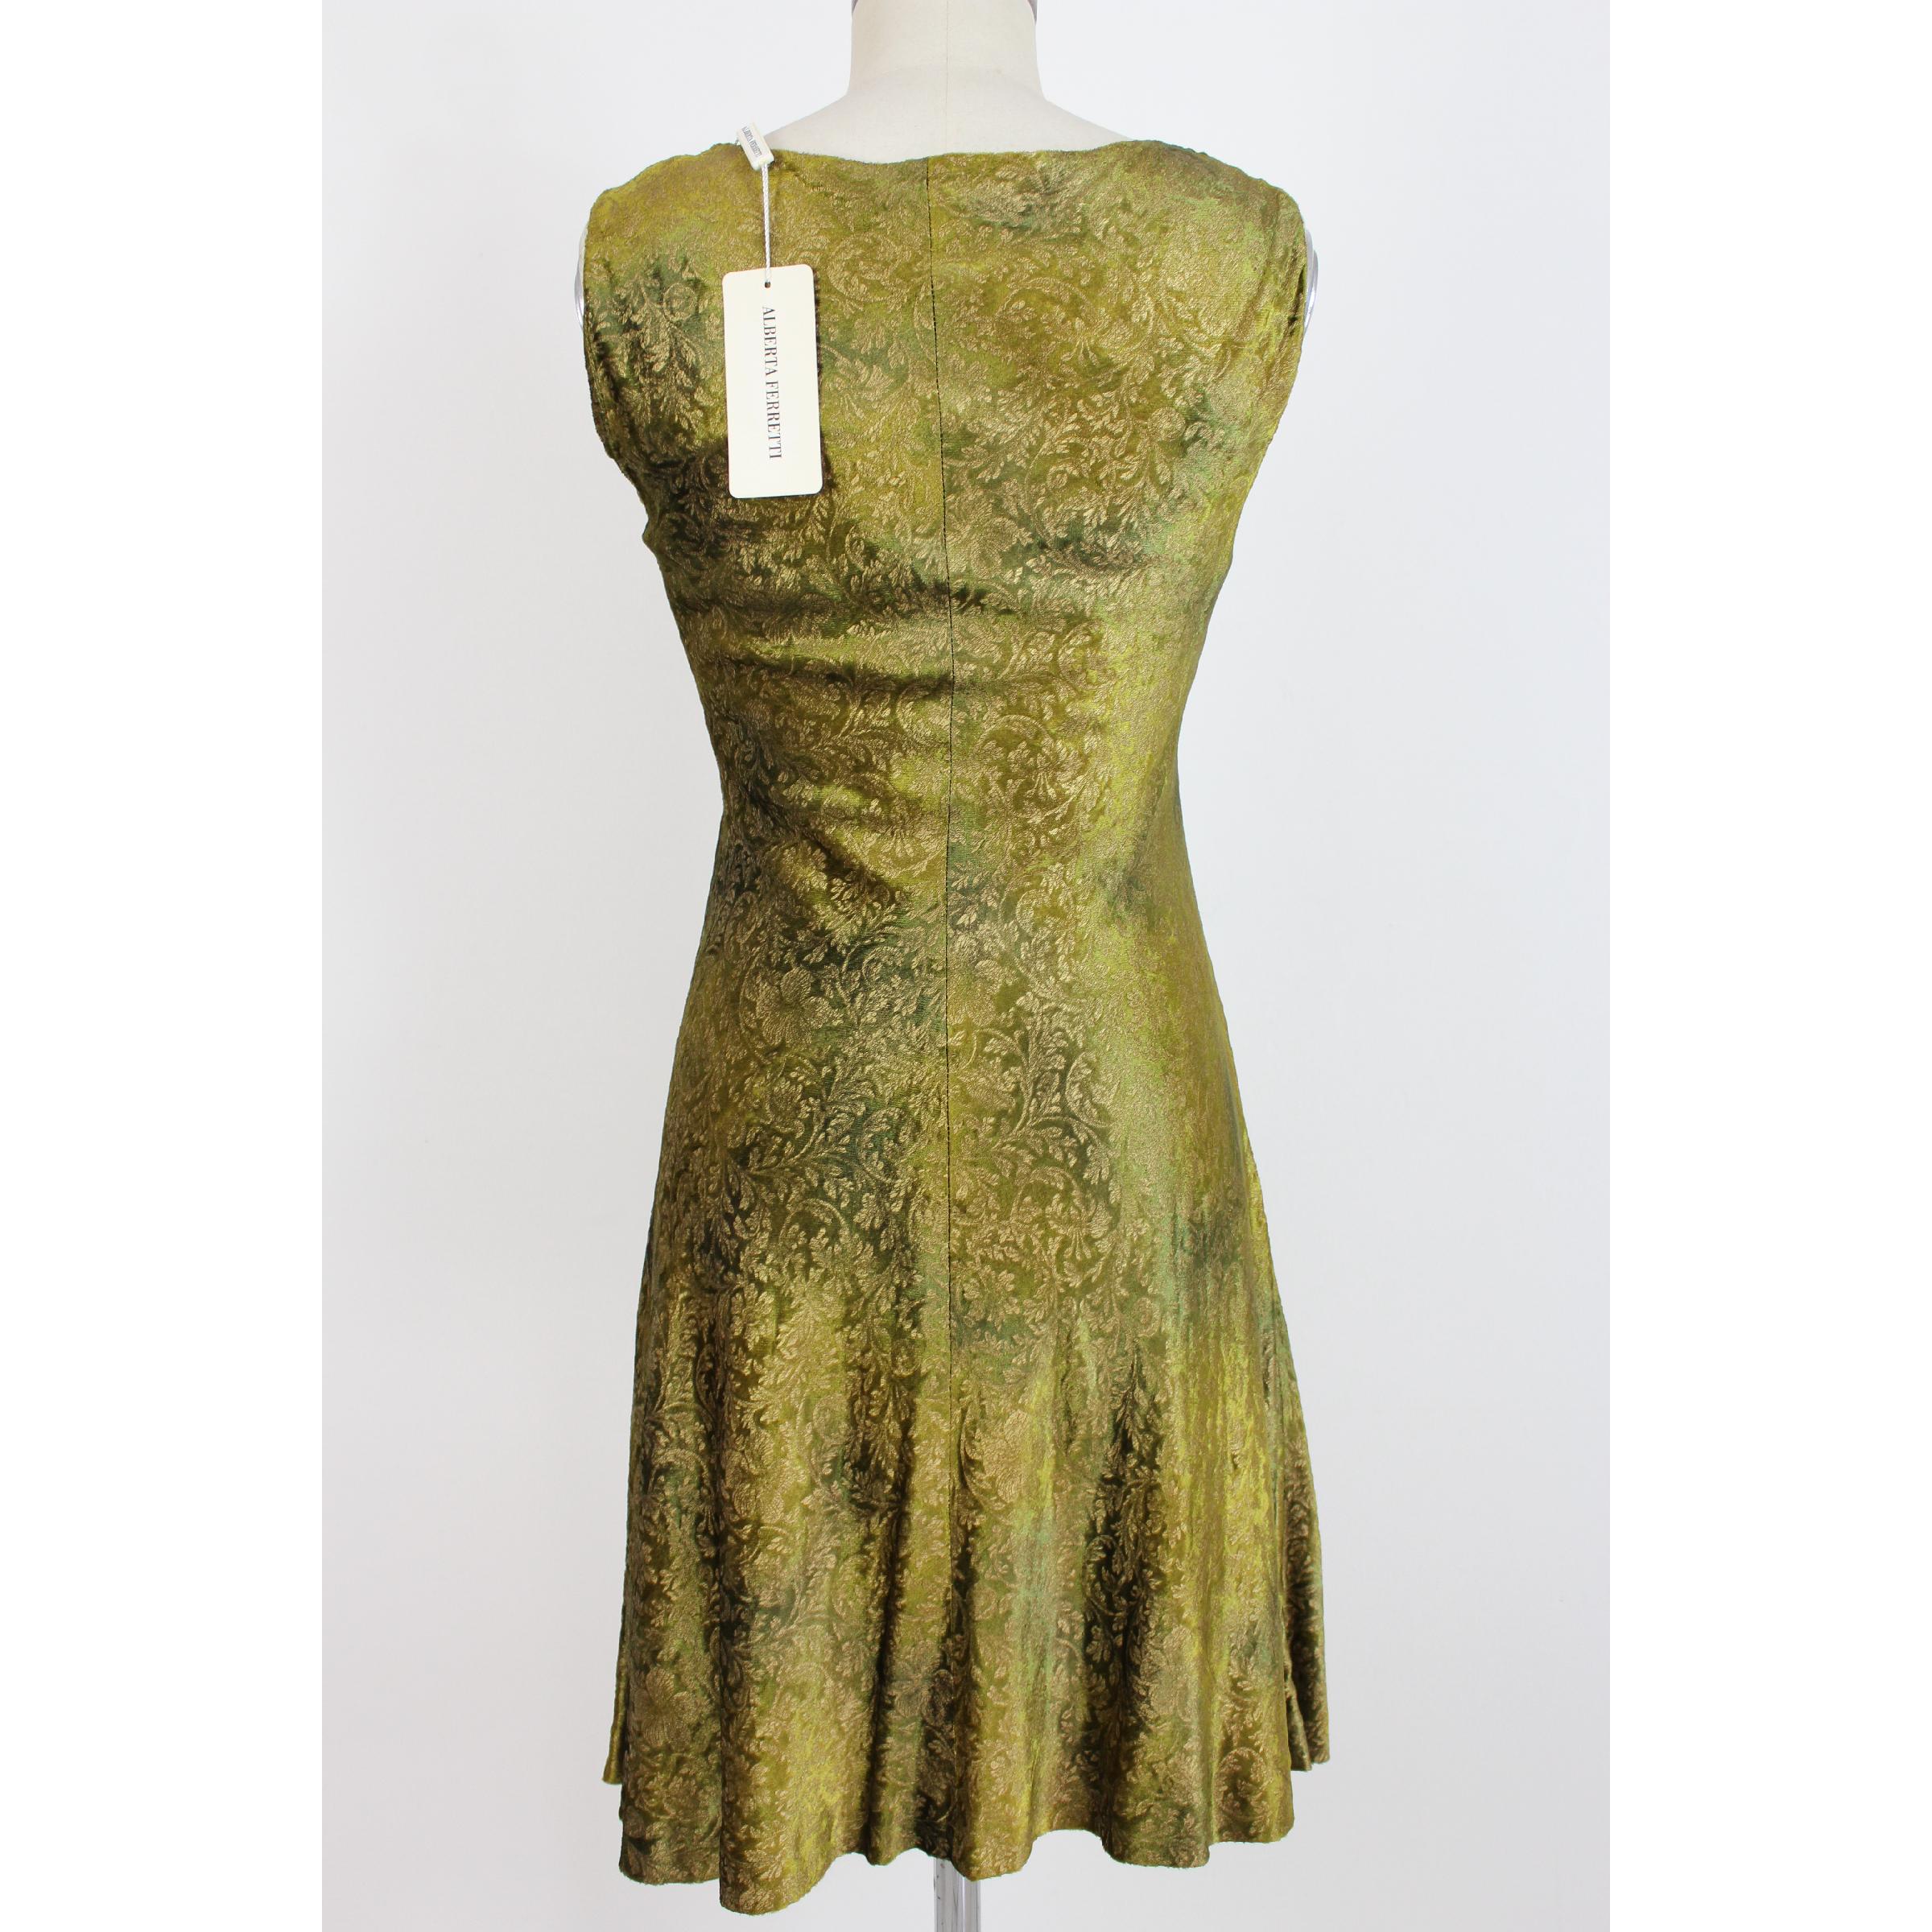 Alberta Ferretti vintage dress for women. Green and gold color, 100% rayon. Damask with floral designs, armholes, lined inside. 2000s. Made in Italy. New with label.

Size: 42 It 8 Us 10 Uk

Shoulder: 42 cm
Bust / Chest: 44 cm
Length: 95 cm